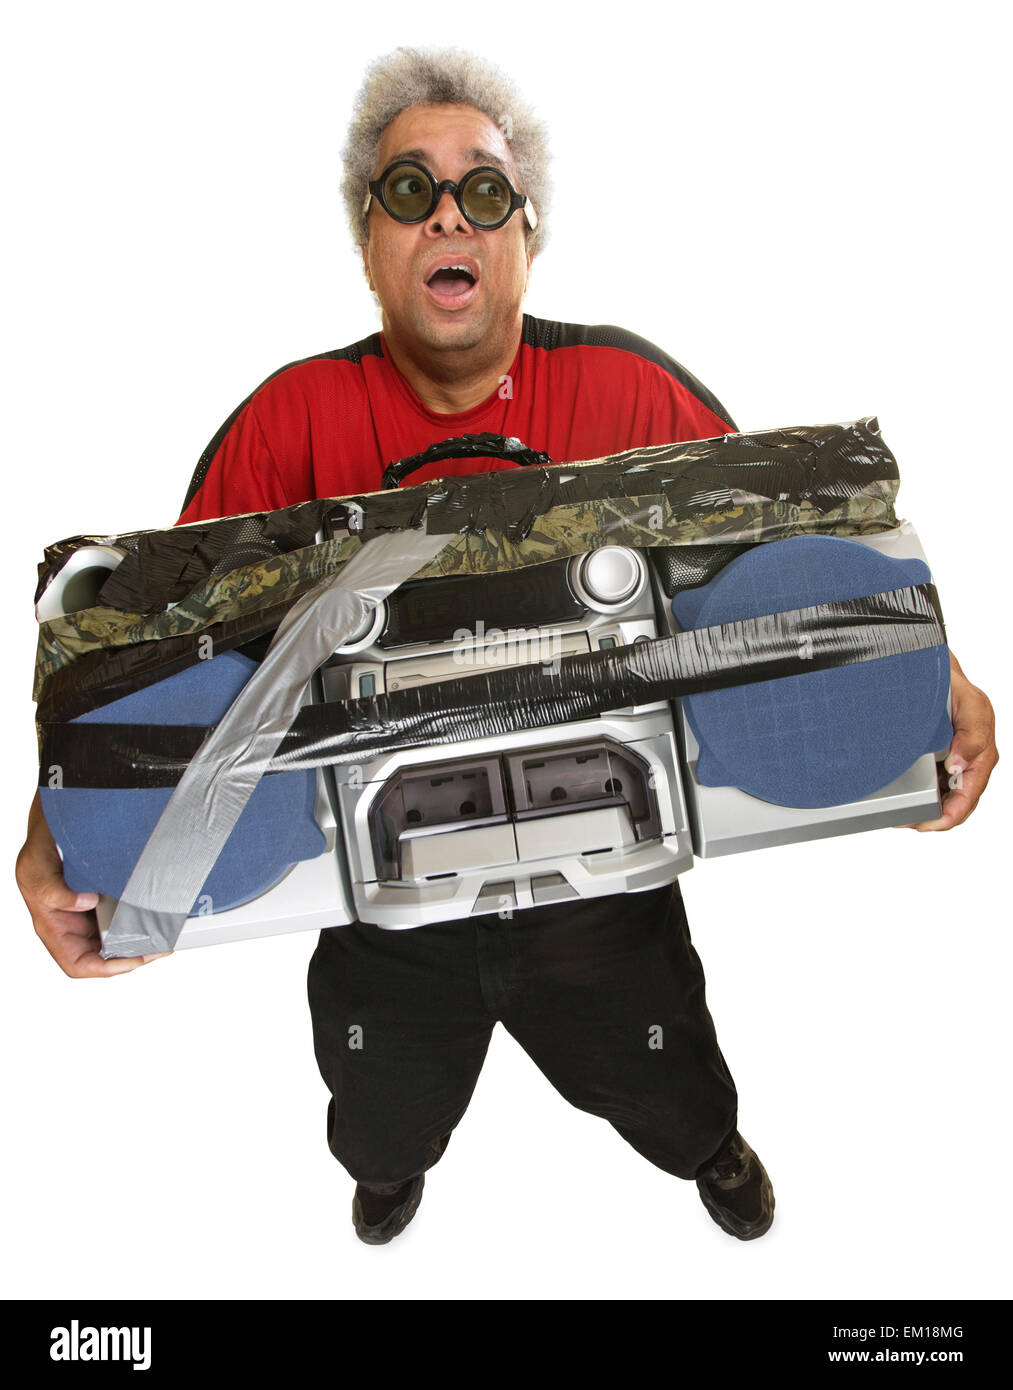 Exhausted Man with Tape Deck Stock Photo